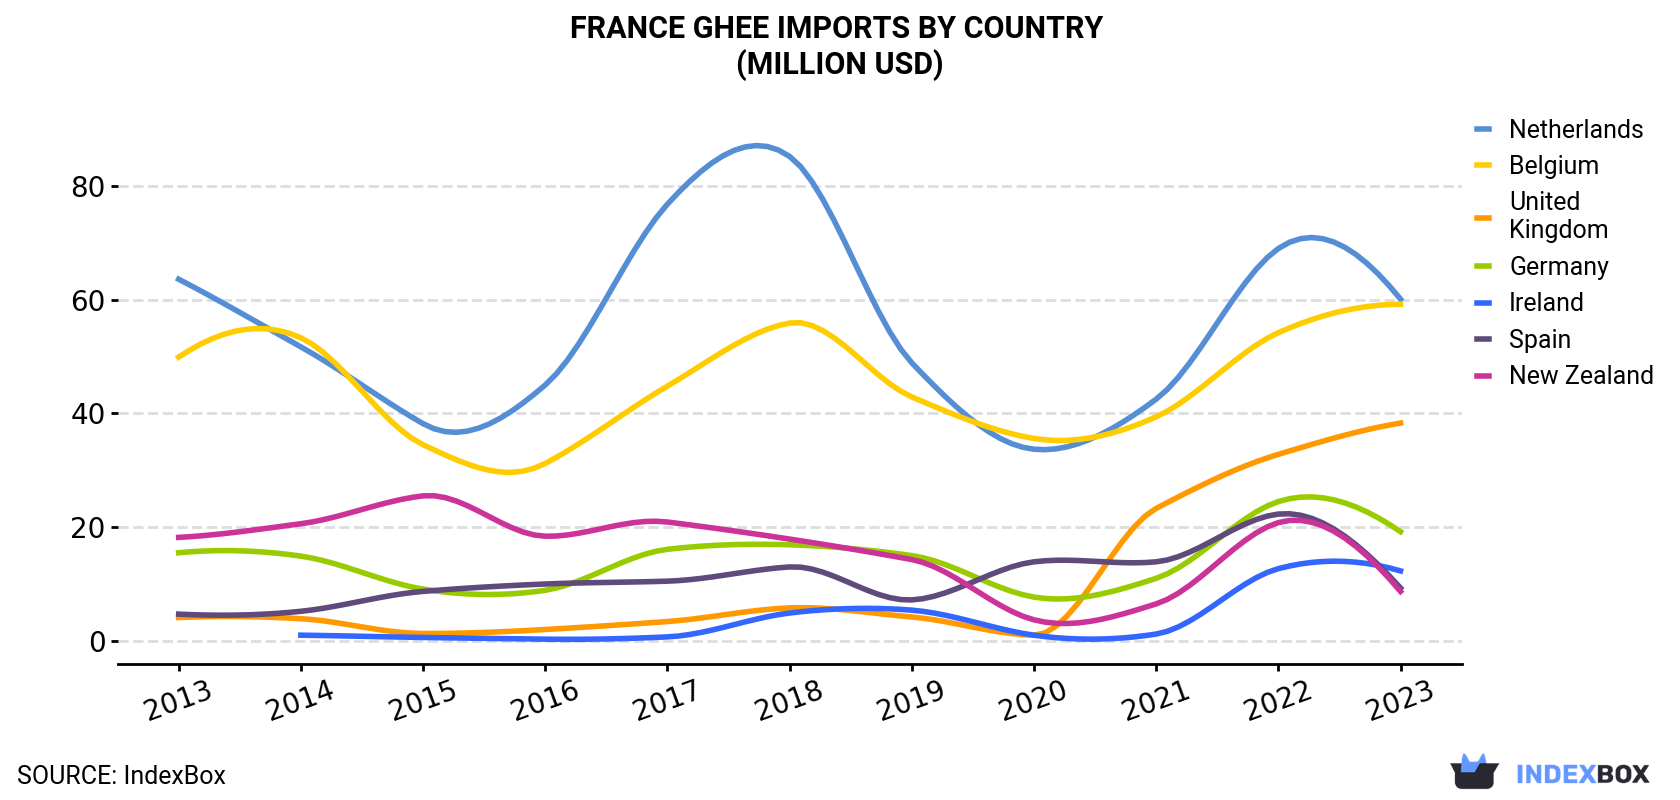 France Ghee Imports By Country (Million USD)